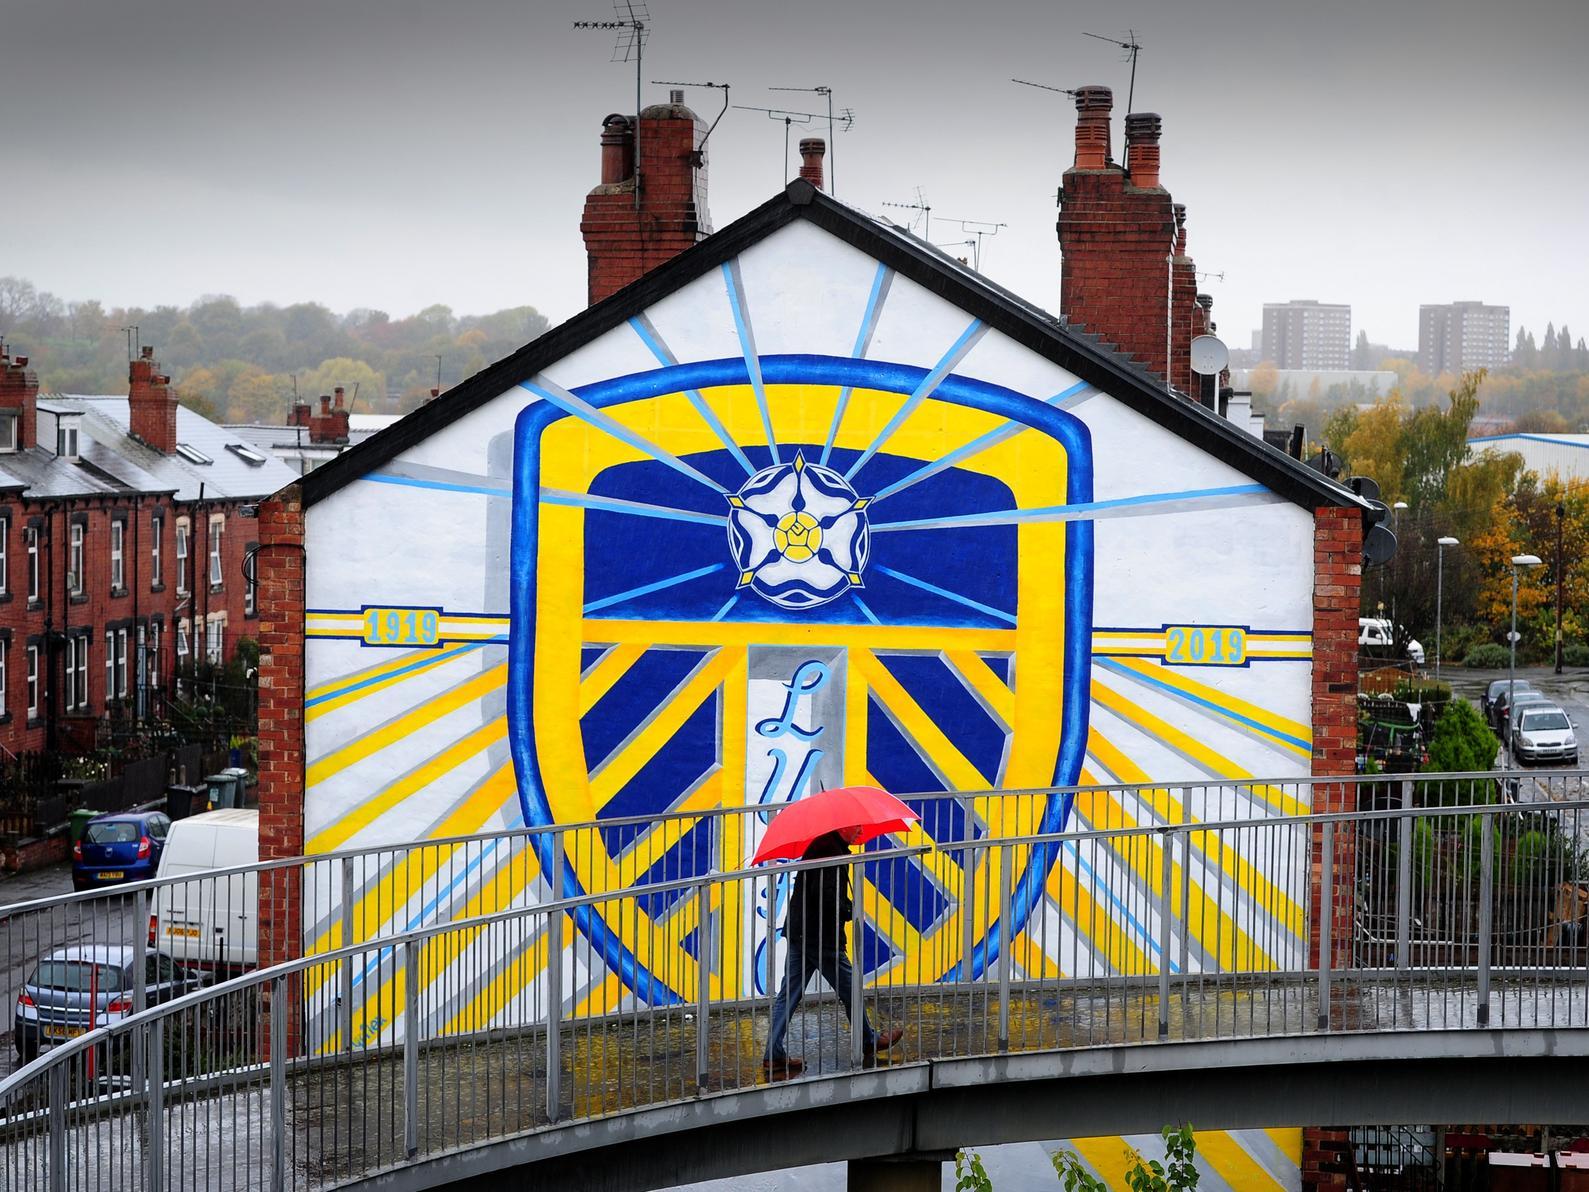 The new mural has become very popular with Leeds United fans.